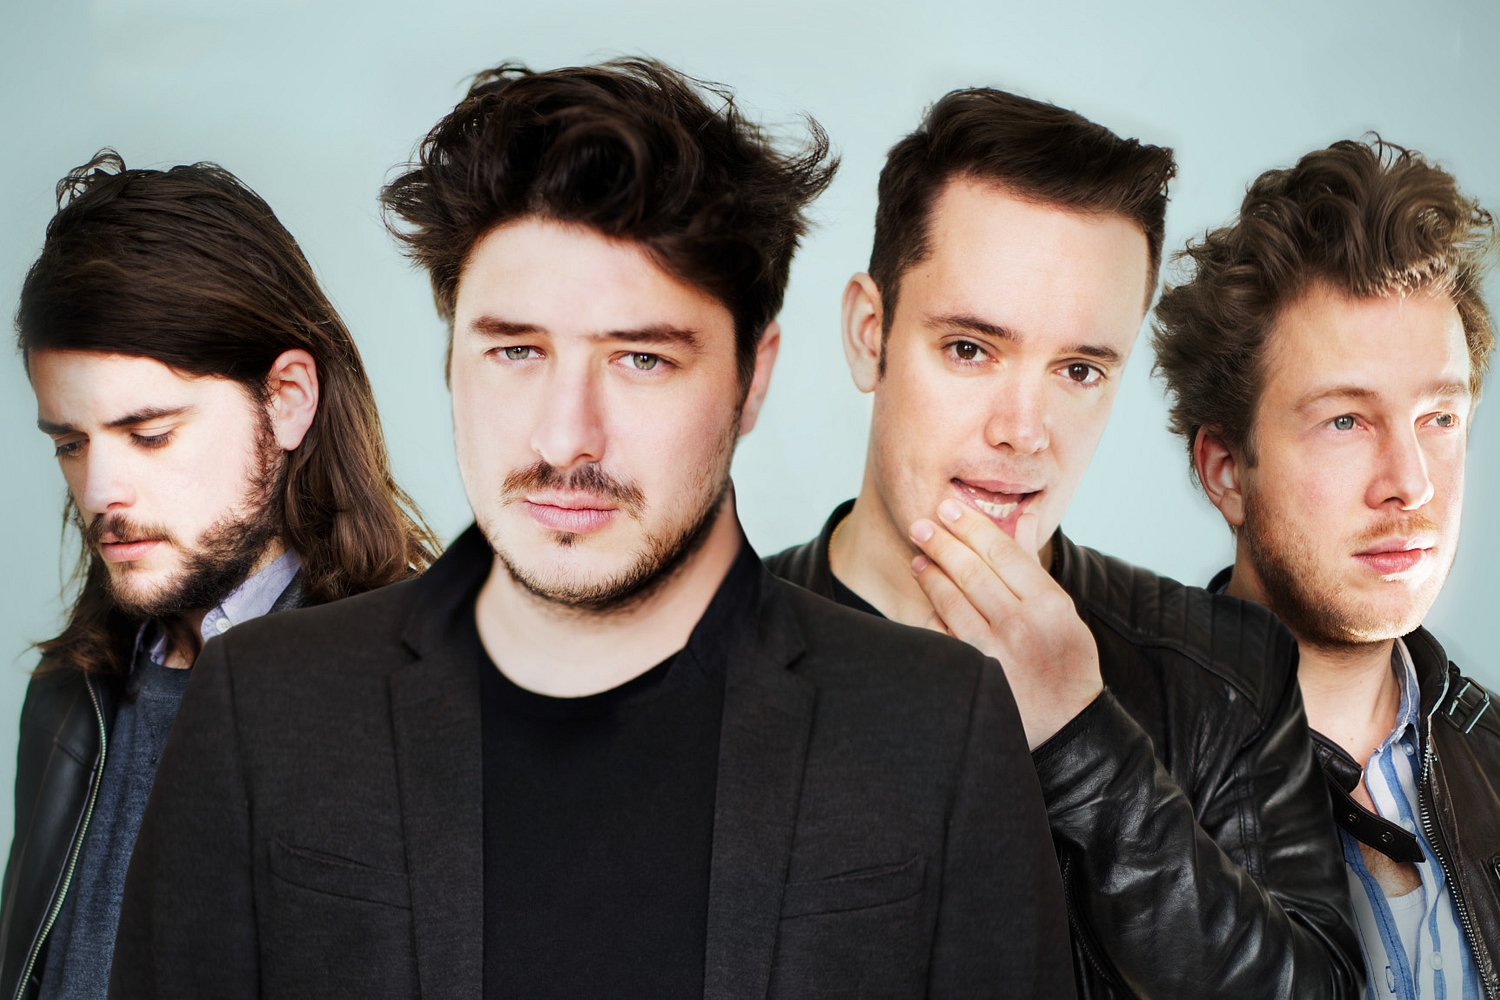 New issue of DIY out now, feat. Mumford & Sons, Brandon Flowers, Alabama Shakes & more